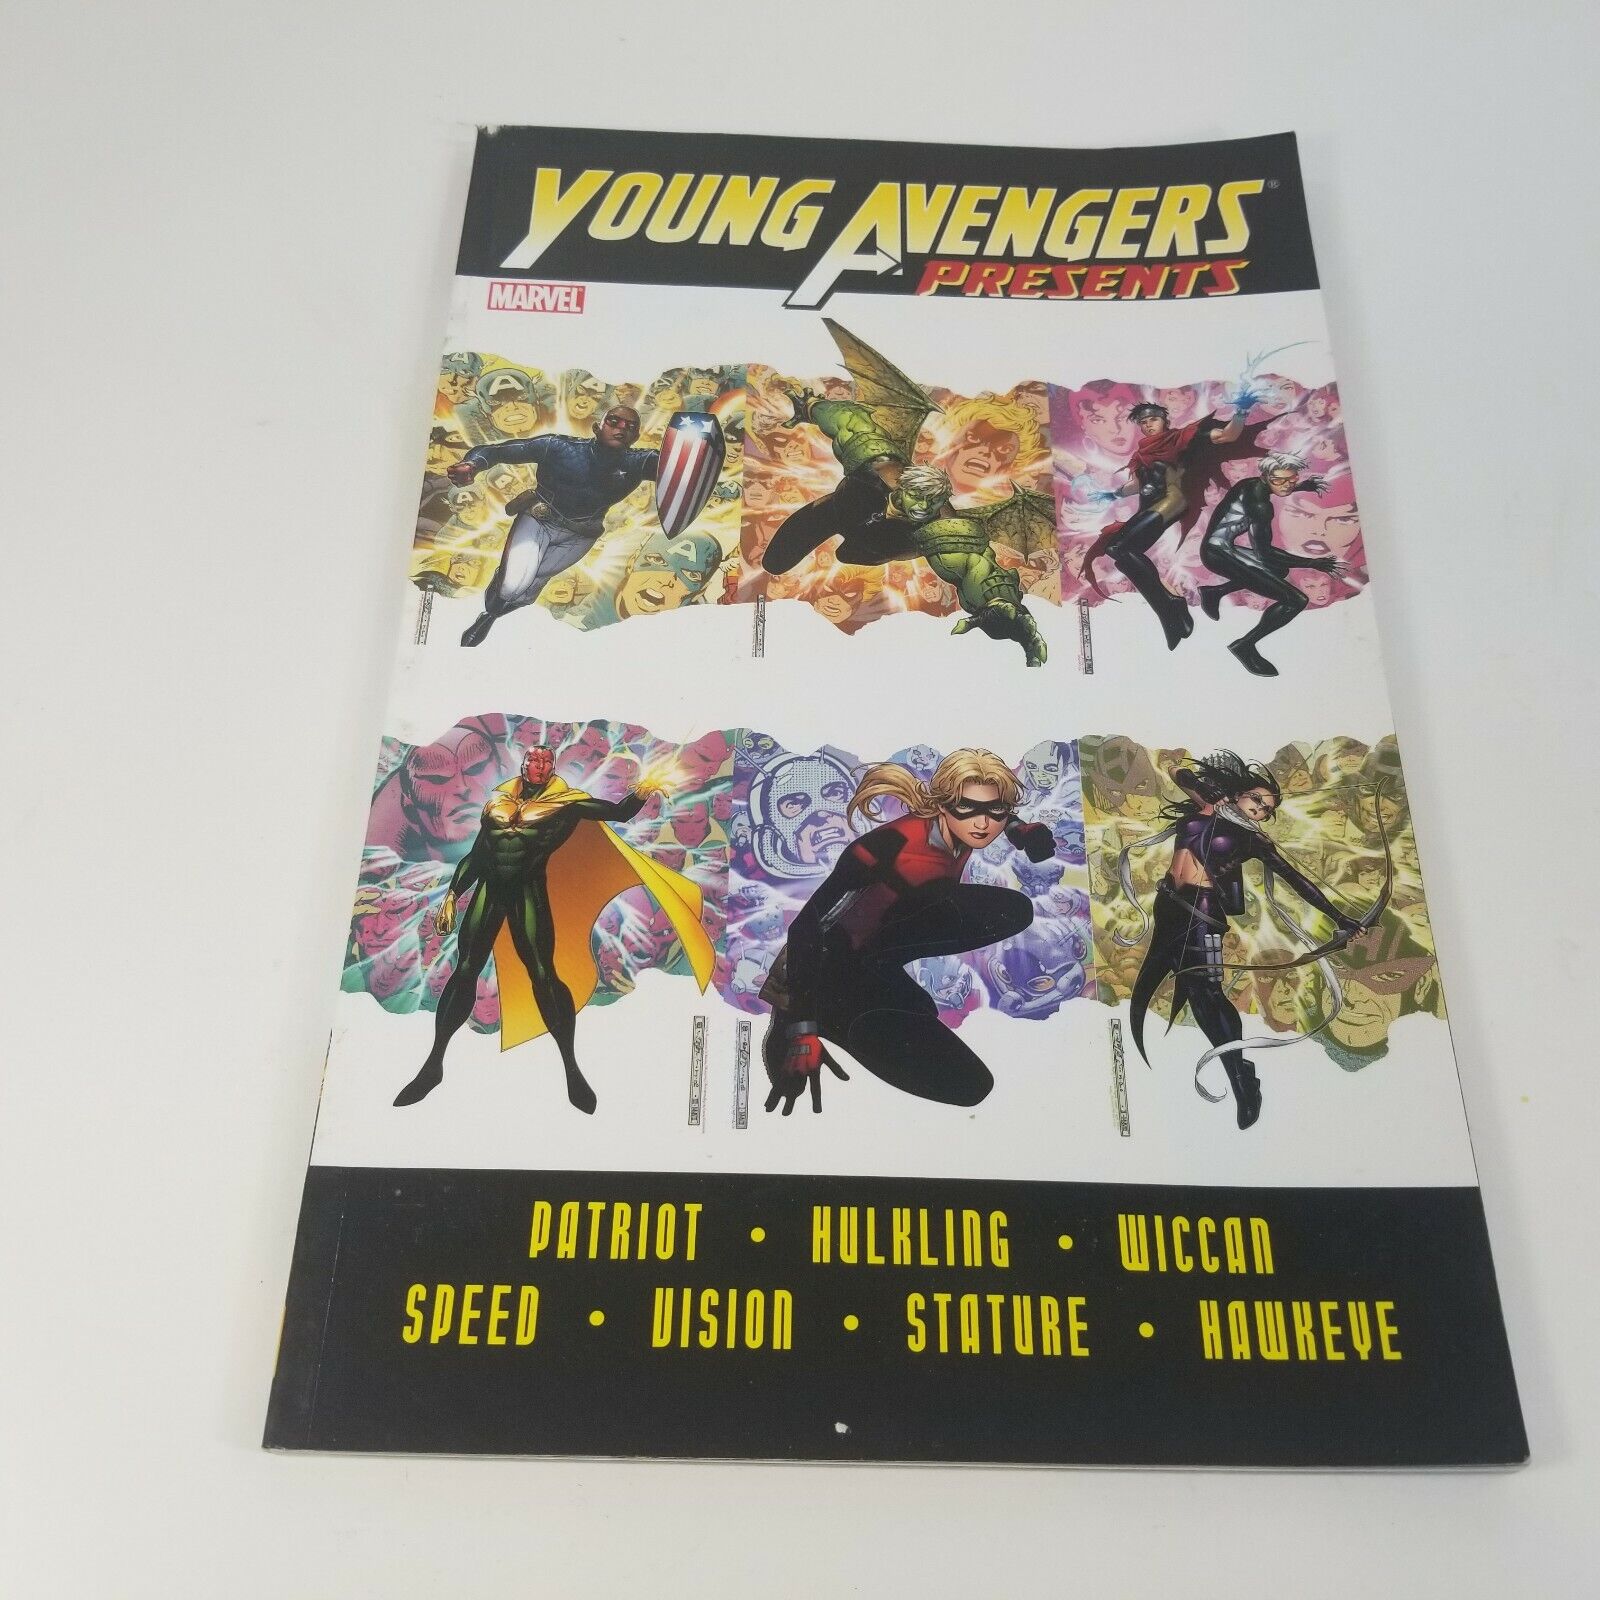 YOUNG AVENGERS PRESENTS, 2008 Marvel TPB Comic Book